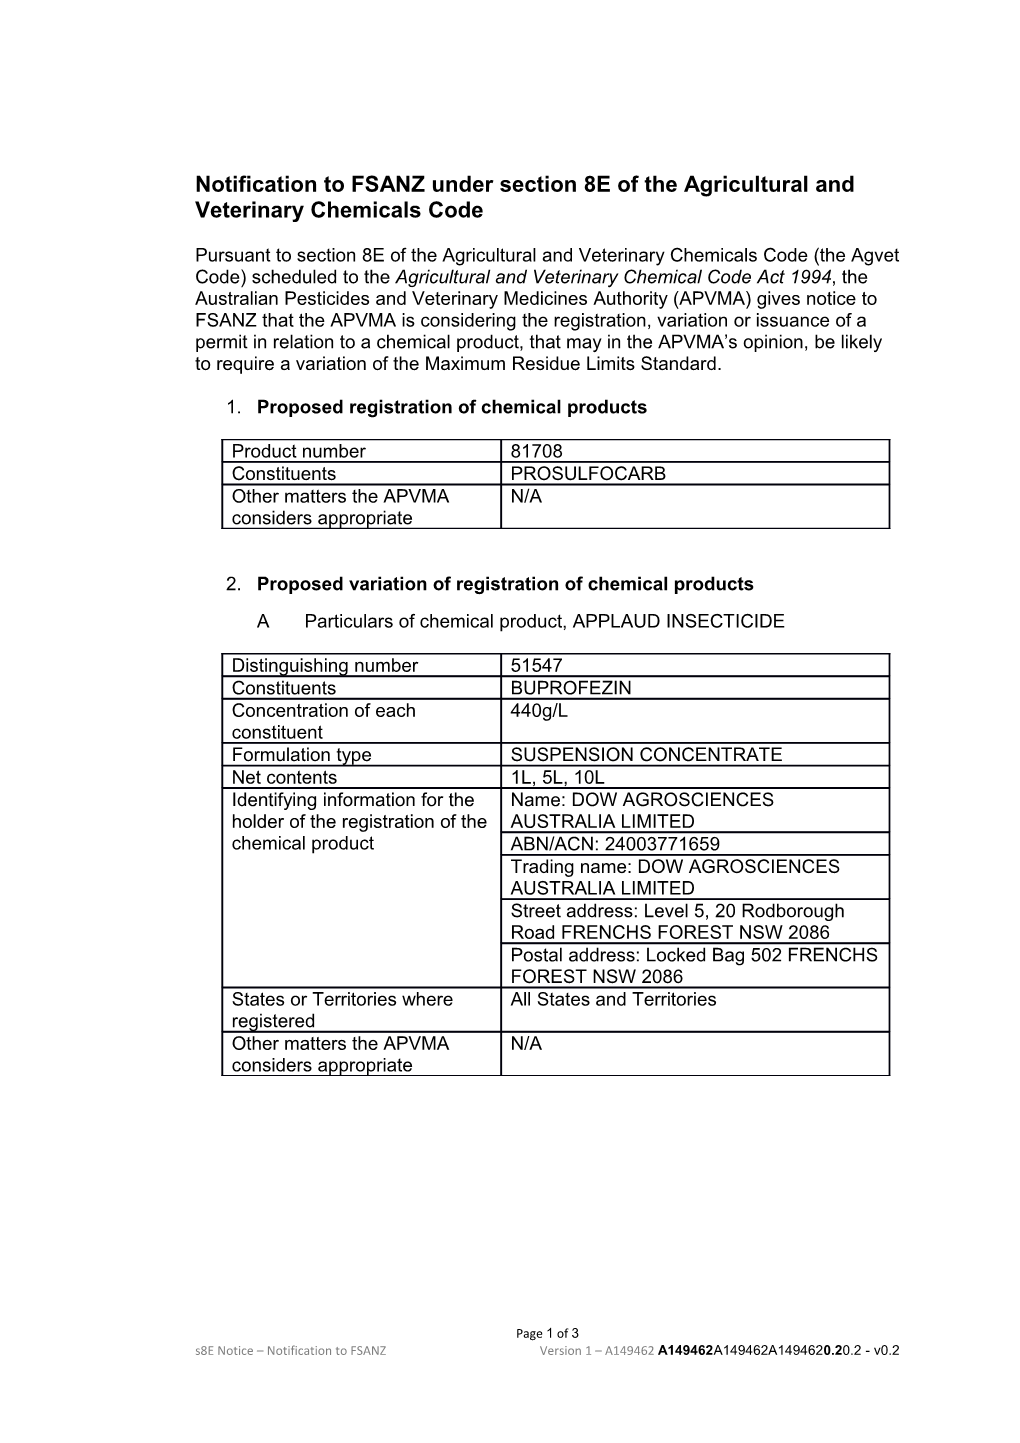 Notification to FSANZ Under Section 8E of the Agricultural and Veterinary Chemicals Code